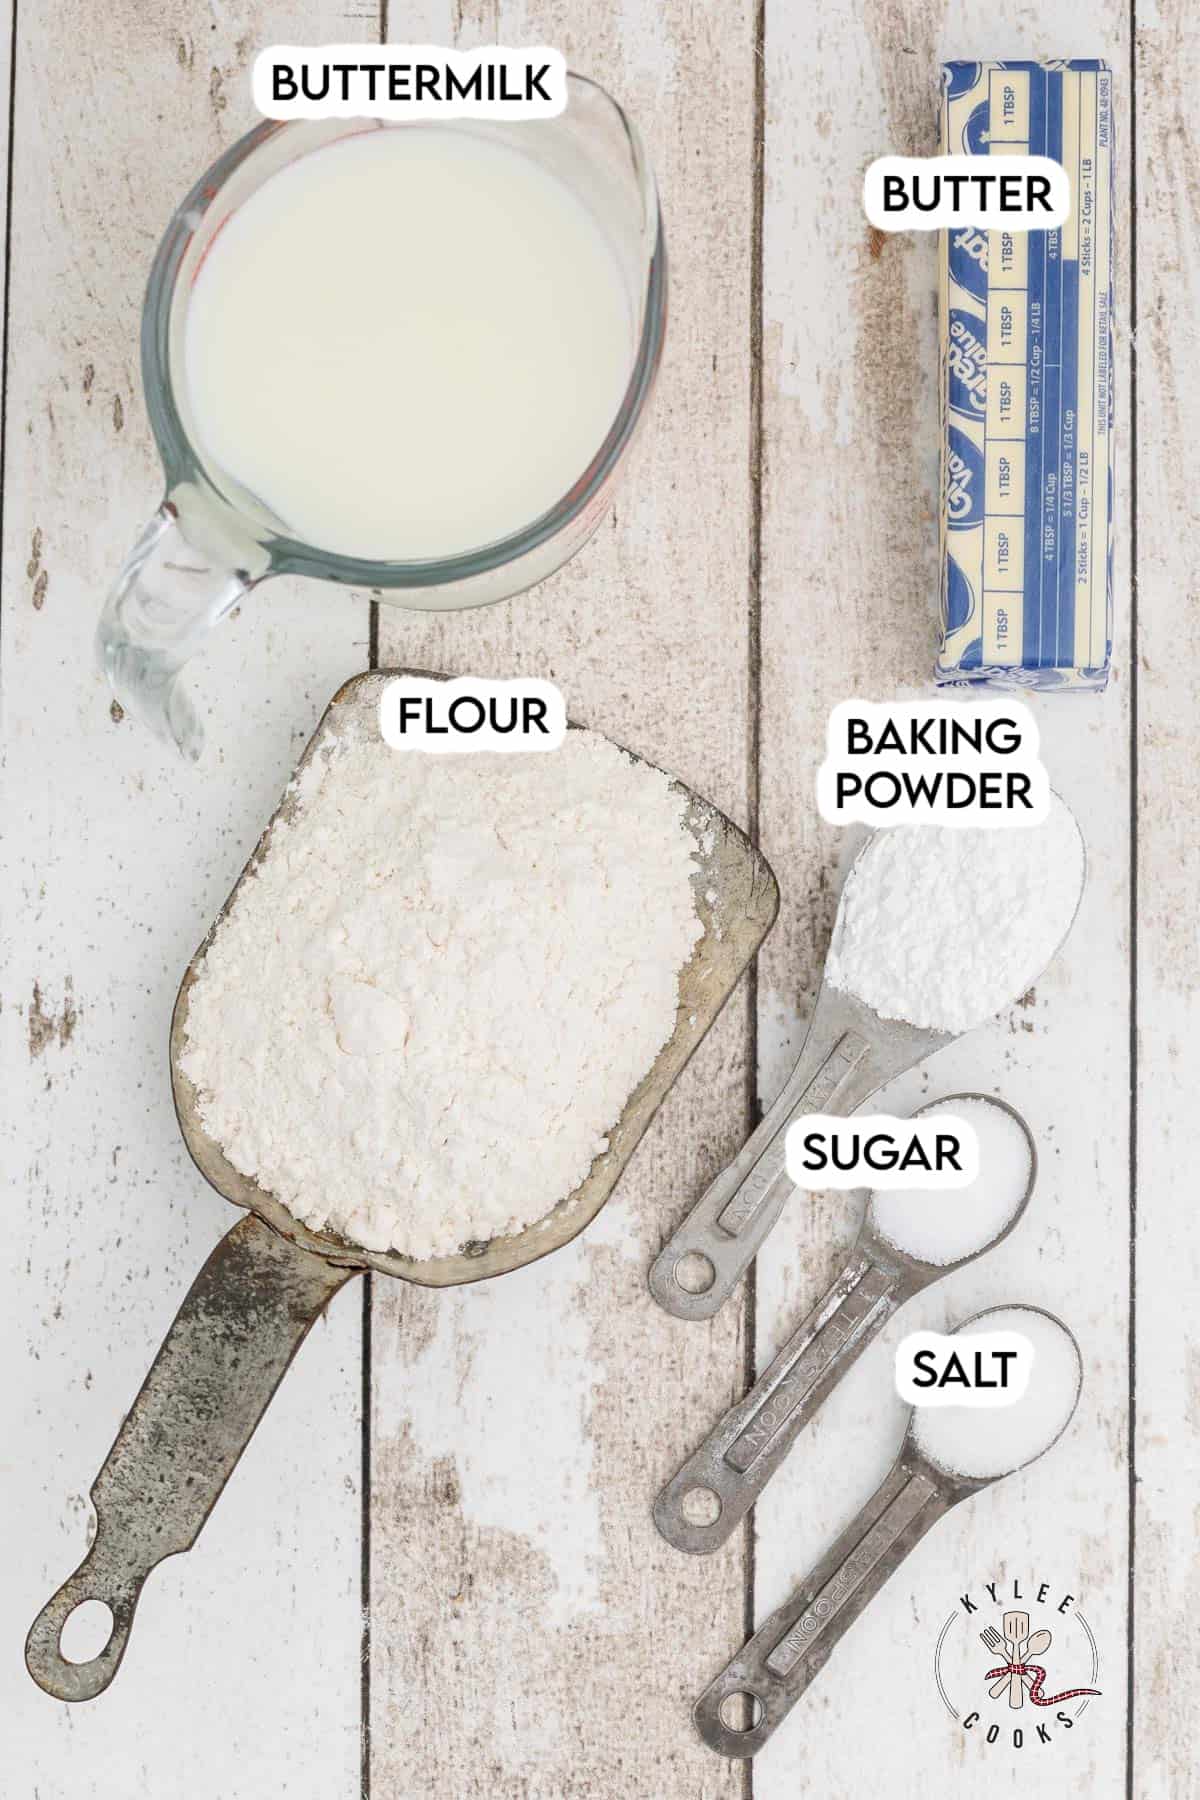 Ingredients to make buttermilk biscuits laid out and labeled.